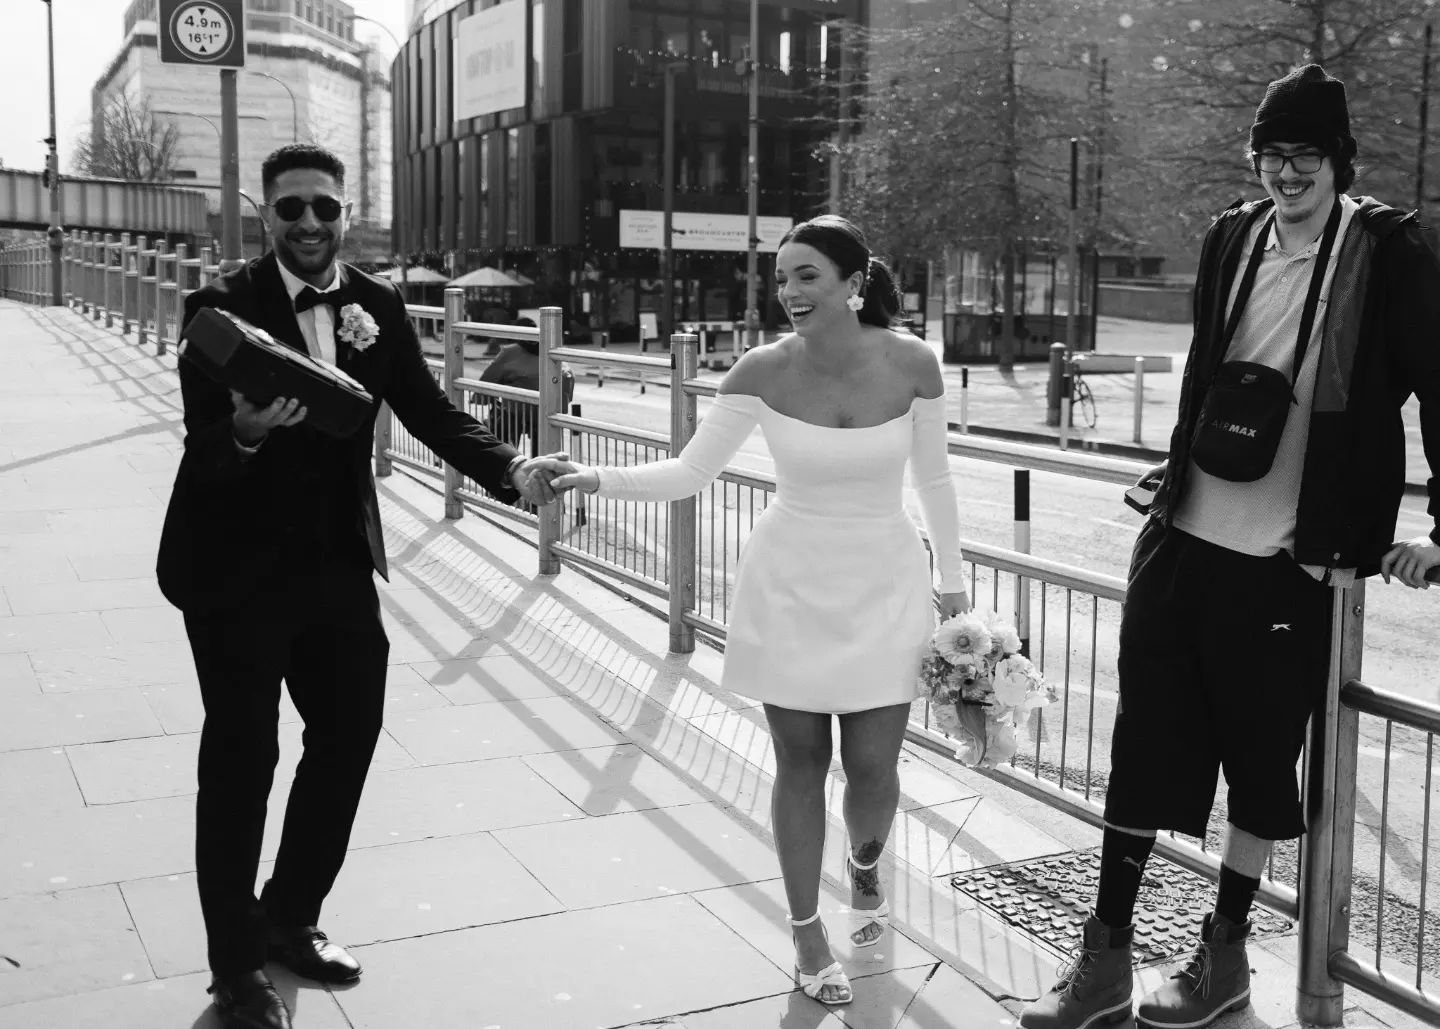 When your models stop a random stranger, ask to borrow his speaker and then dance in the street 🪩⚡️
These guys were awesome! 
Can't wait to shoot some London weddings this year 🖤
.
.
.
Loved this cute styled shoot.
Venue - @thebroadcasterlondon @ad